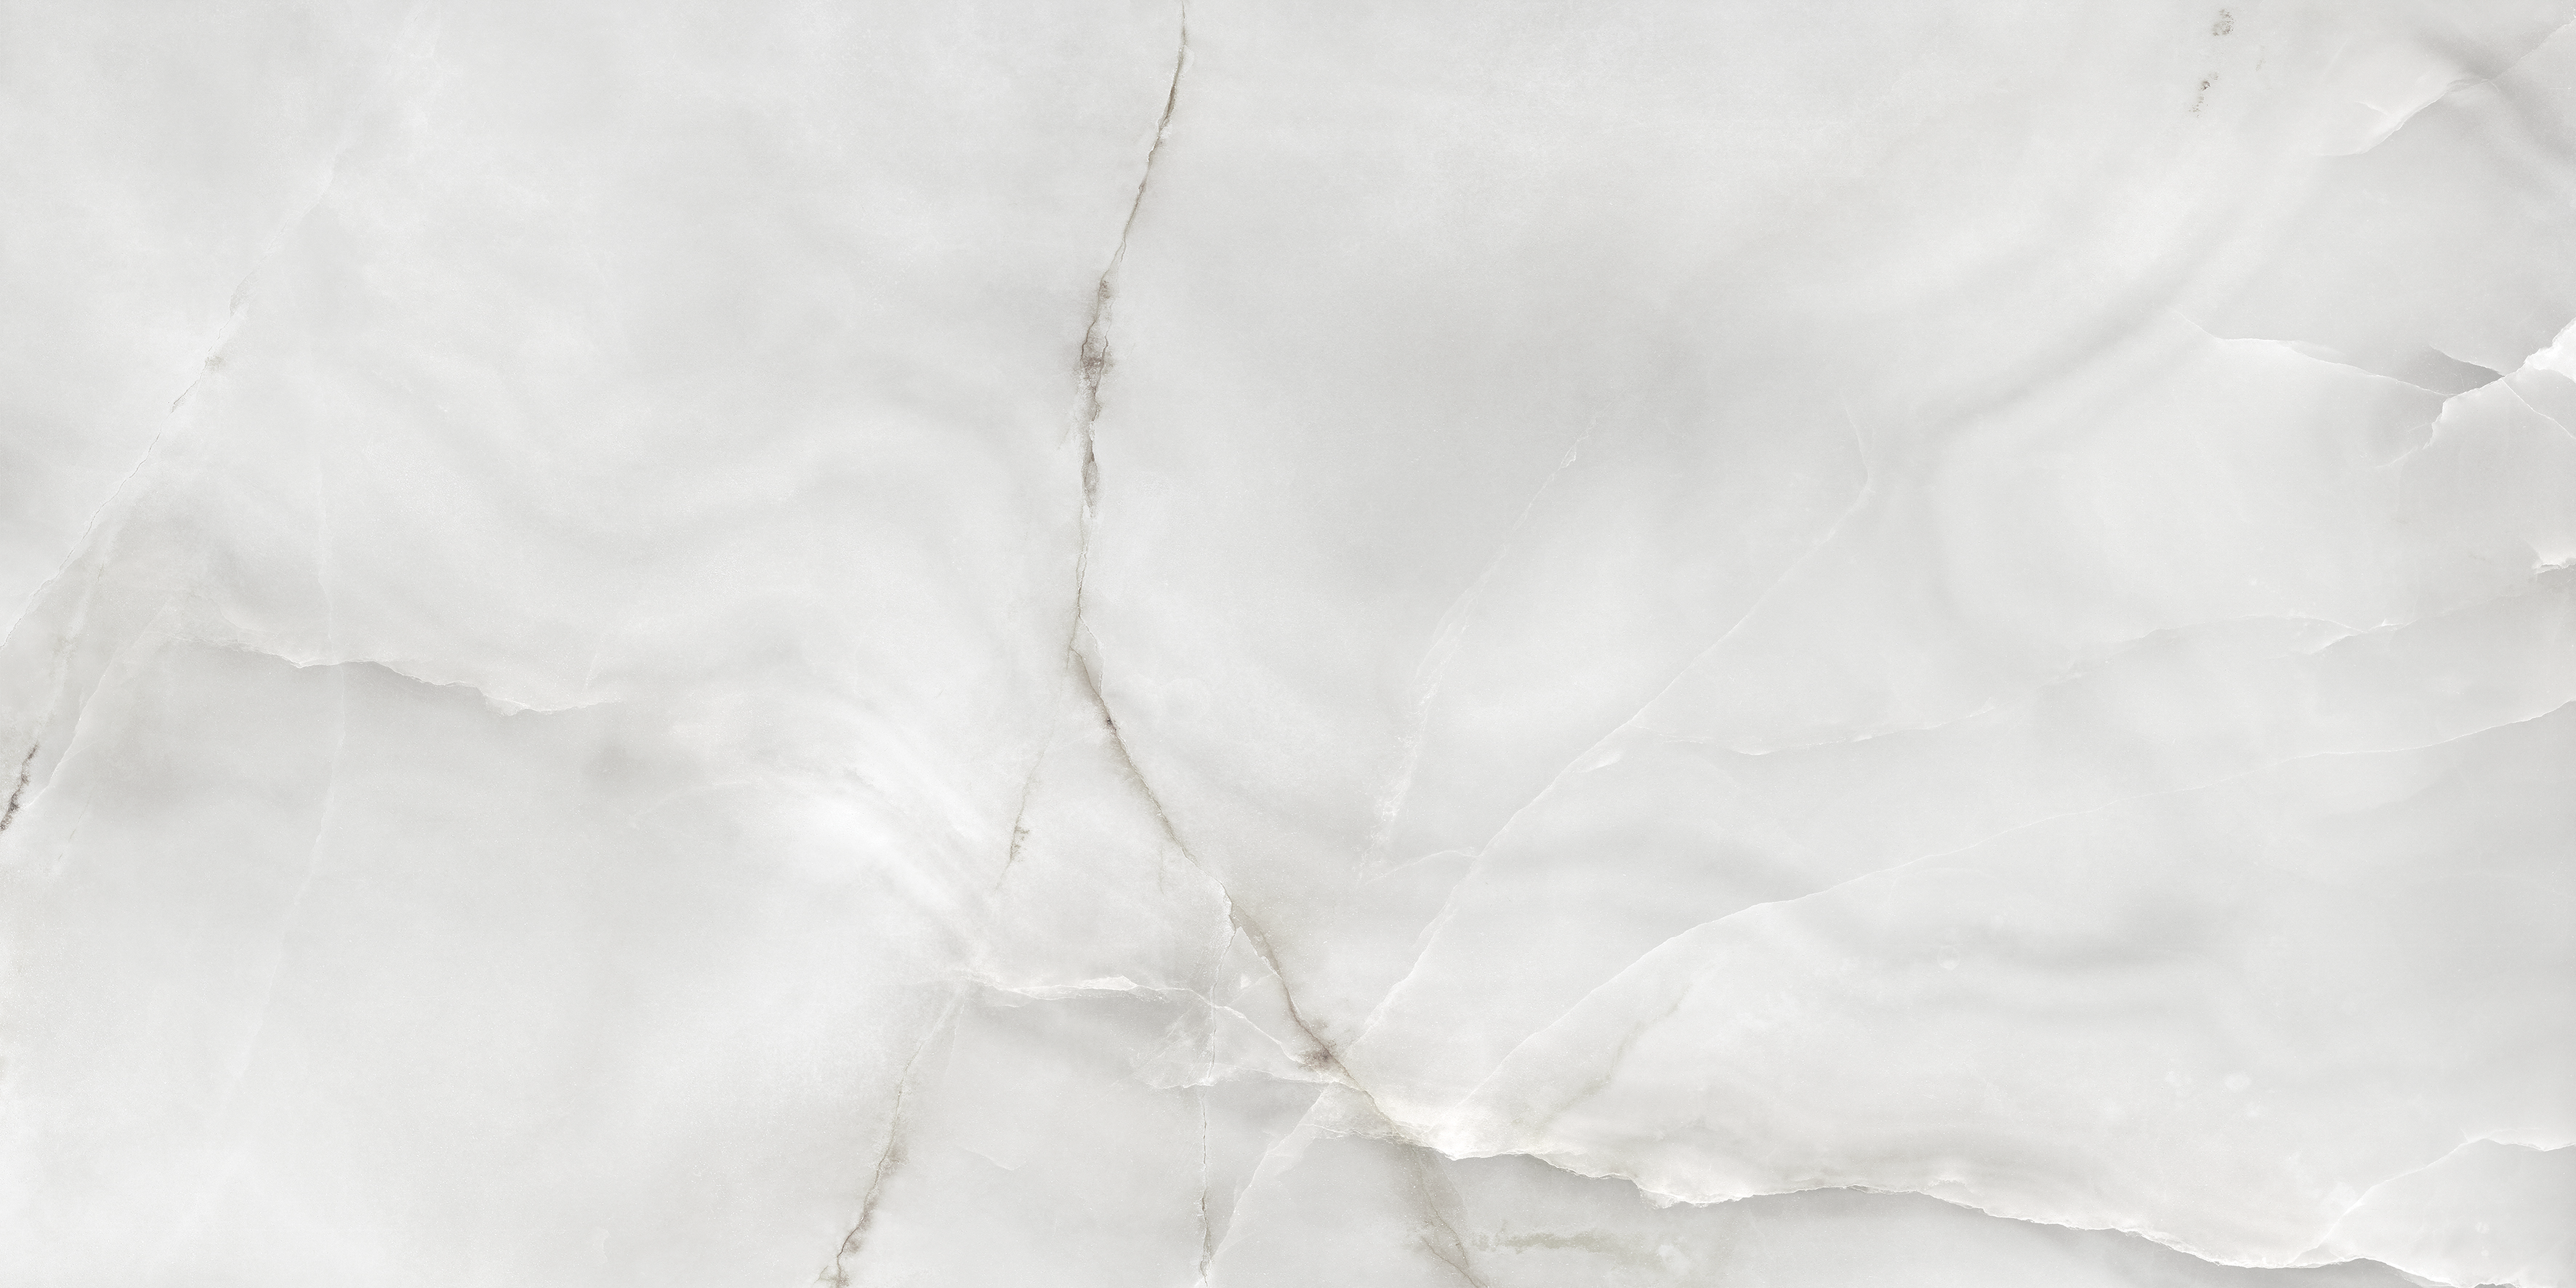 onyx nuvolato pattern glazed porcelain field tile from la marca anatolia collection distributed by surface group international honed finish rectified edge 24x48 rectangle shape